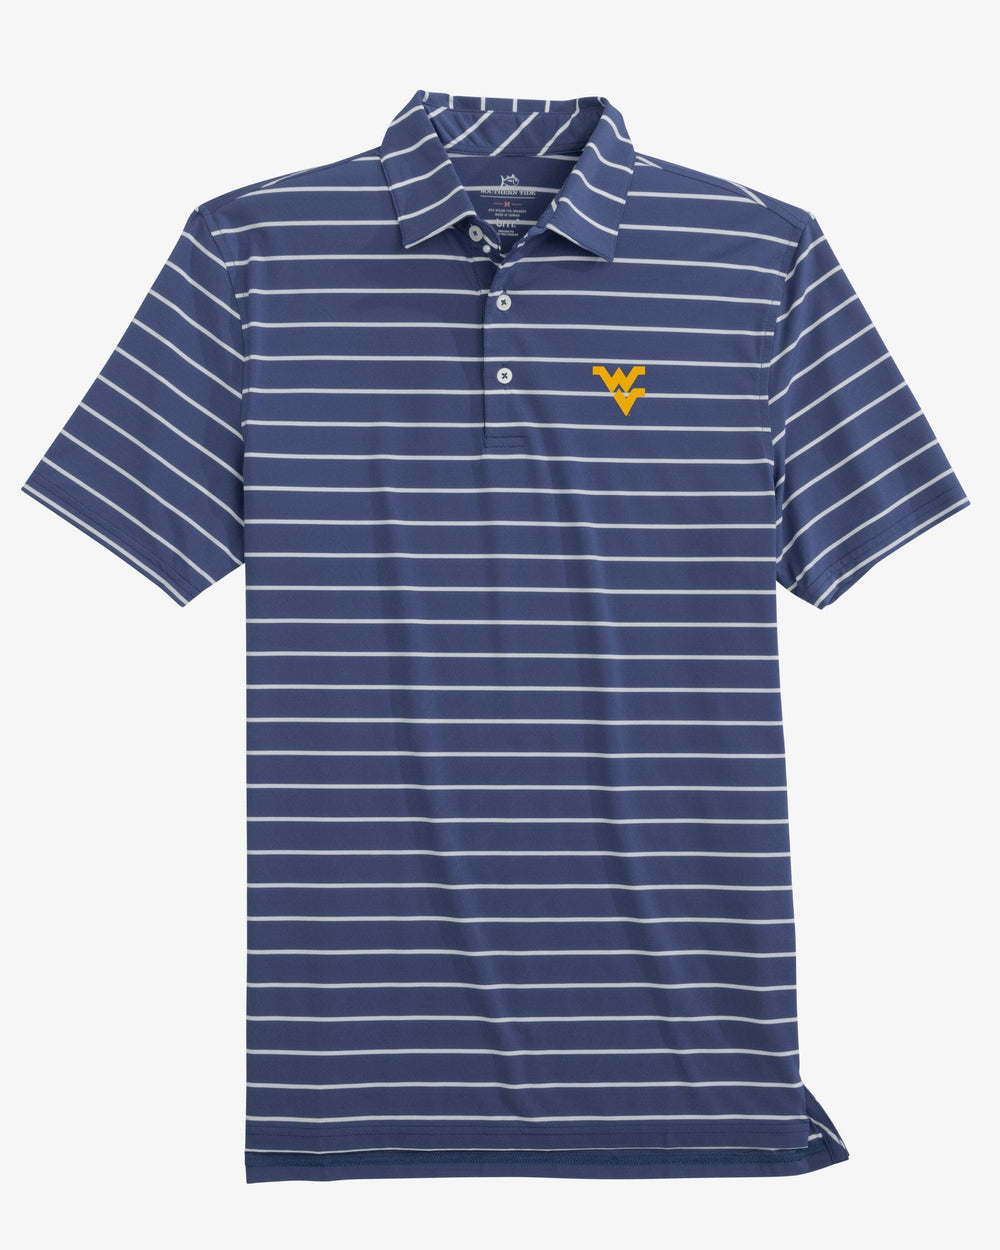 The front view of the West Virginia Brreeze Desmond Stripe Performance Polo by Southern Tide - Navy